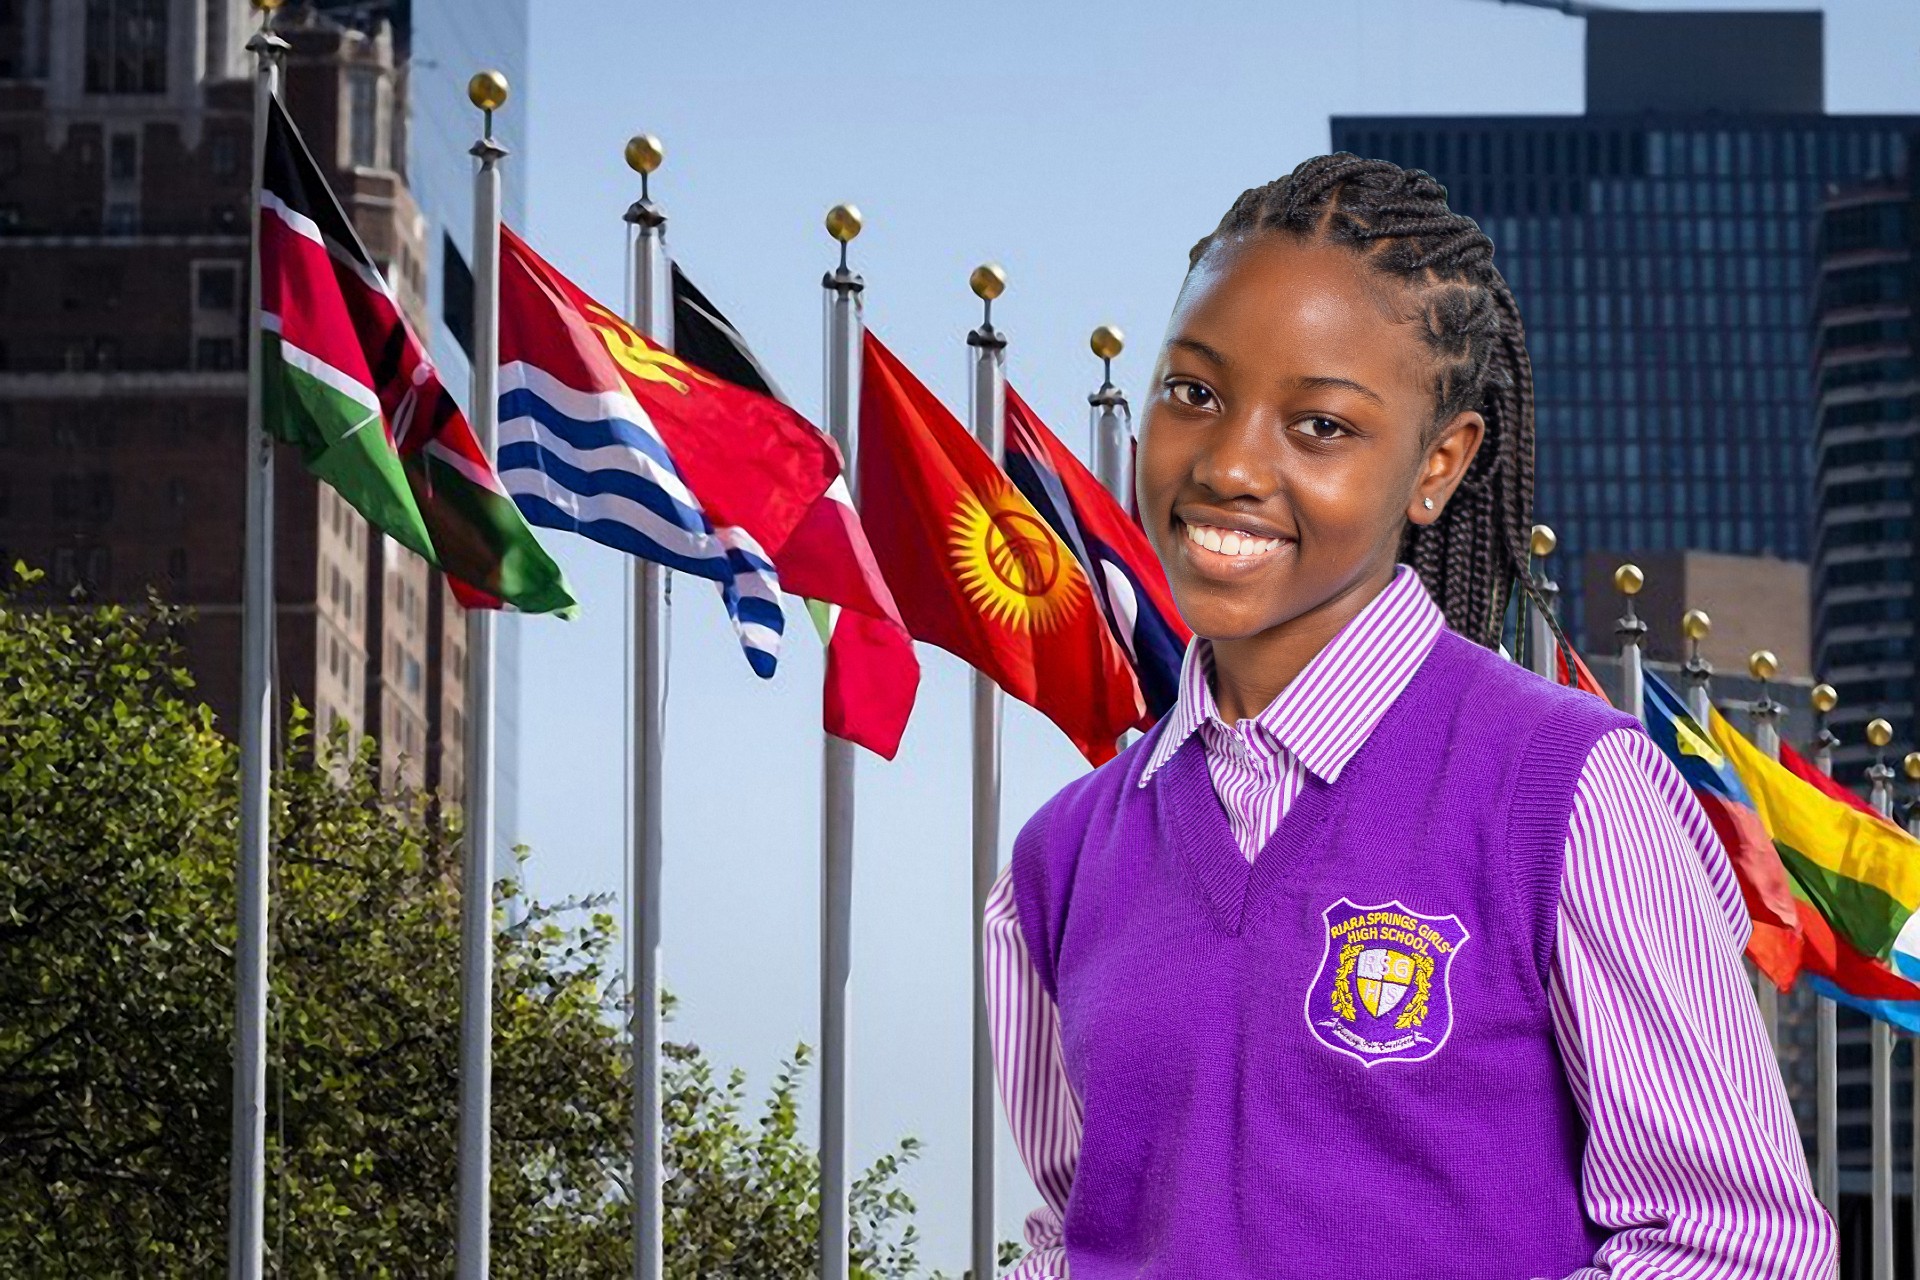 A Riara springs girls high school student standing next to multiple international flags